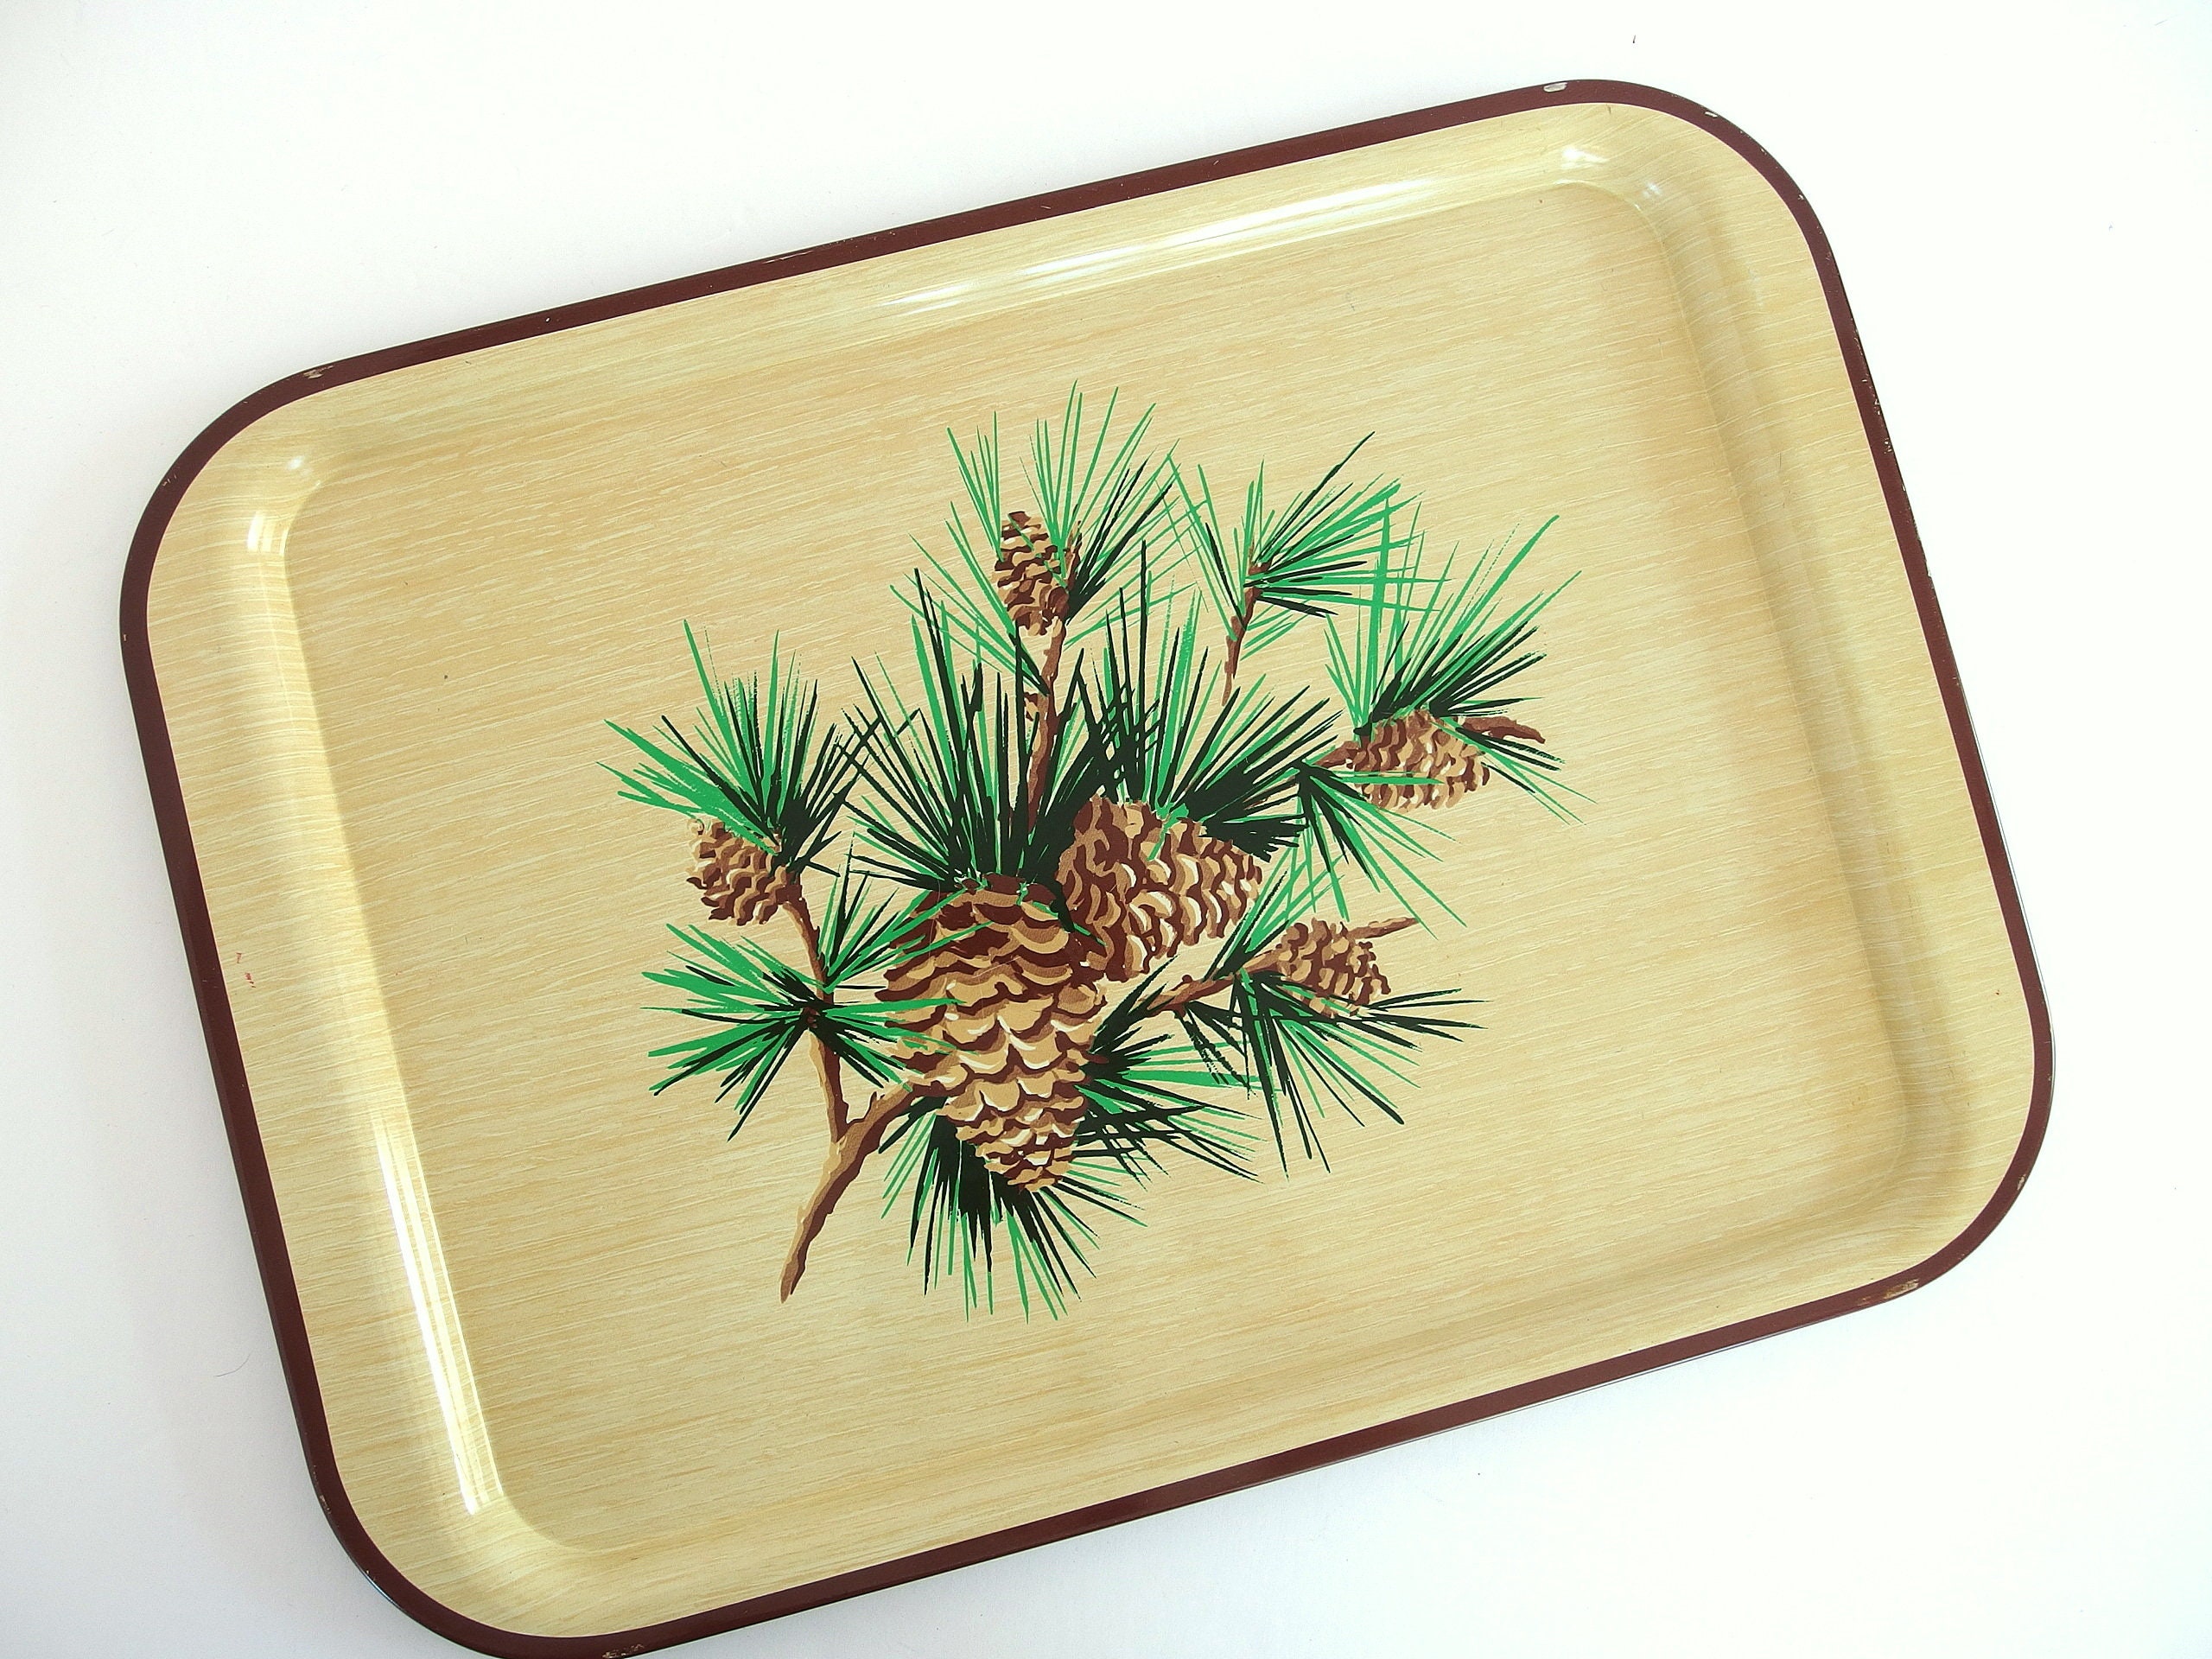 Frosted Pine Cones - Tiered Tray Decor - Foundations Decor